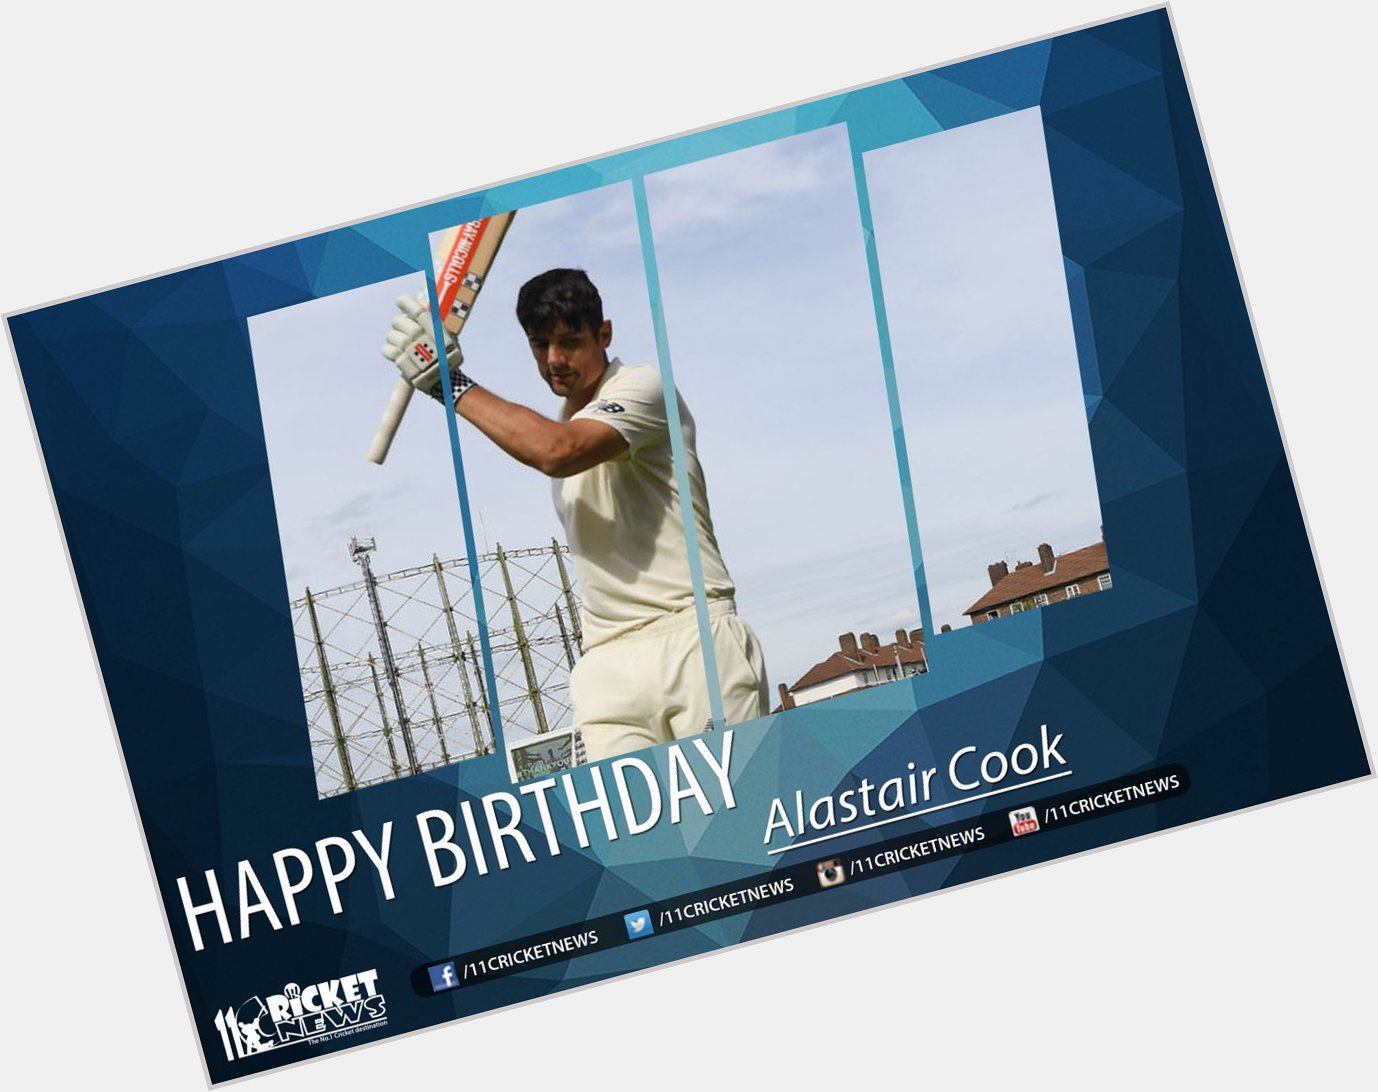 Happy Birthday \" Alastair Cook\" . He turns 34 today 